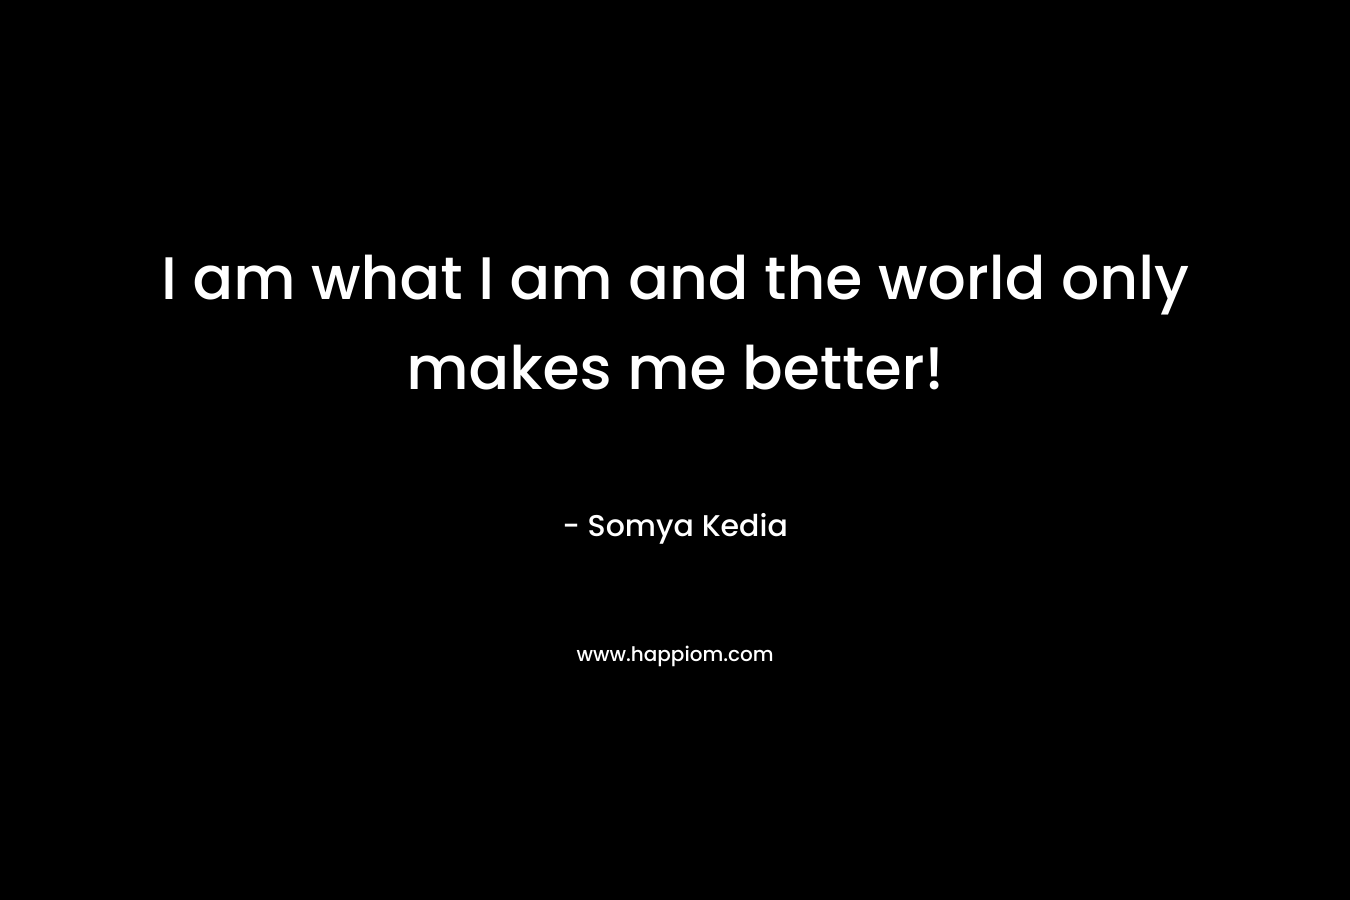 I am what I am and the world only makes me better! – Somya Kedia